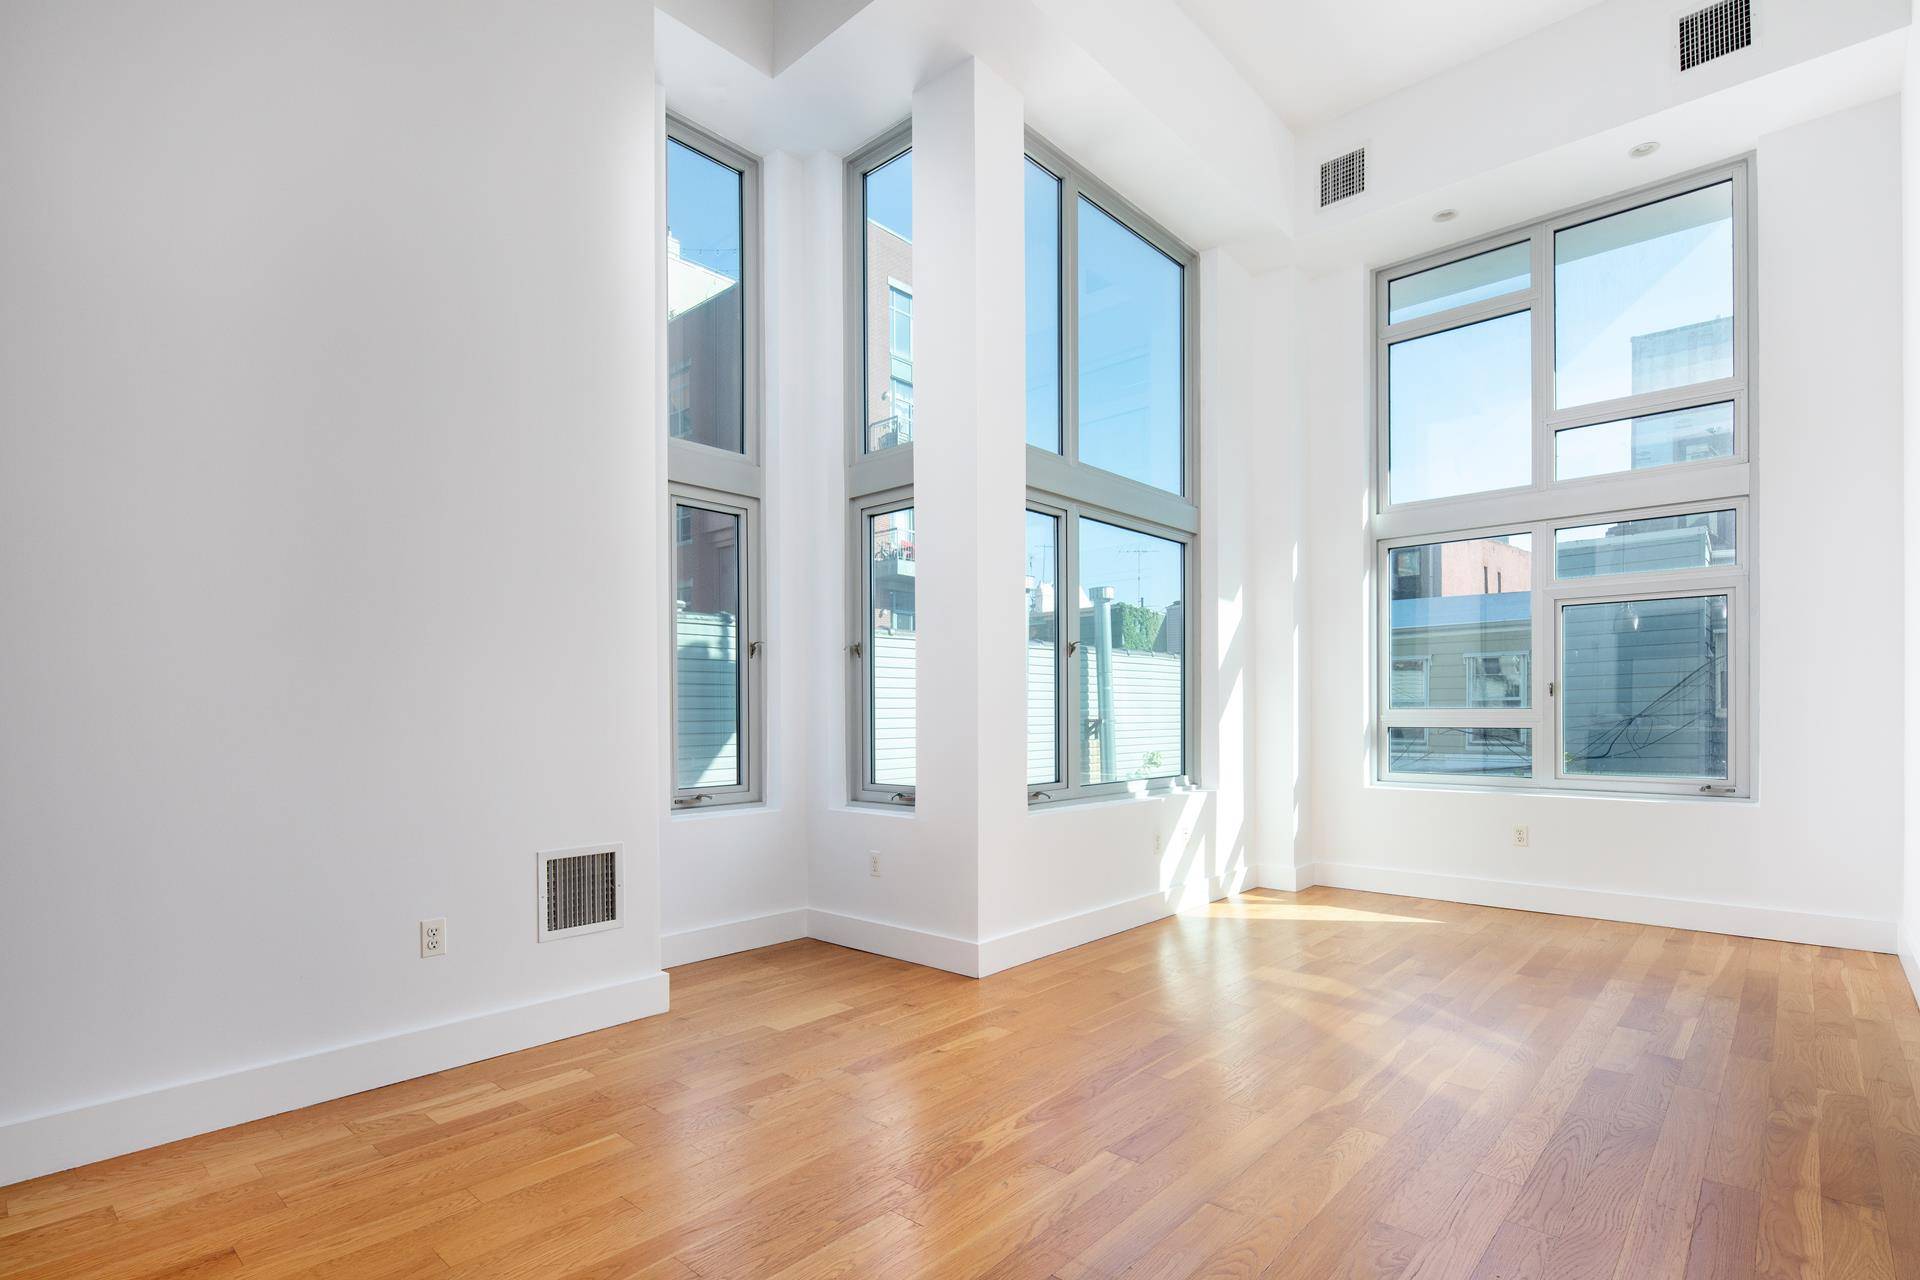 Centrally located in the heart of the North side of Williamsburg, you'll find this comfortable one bedroom home available for rent immediately.